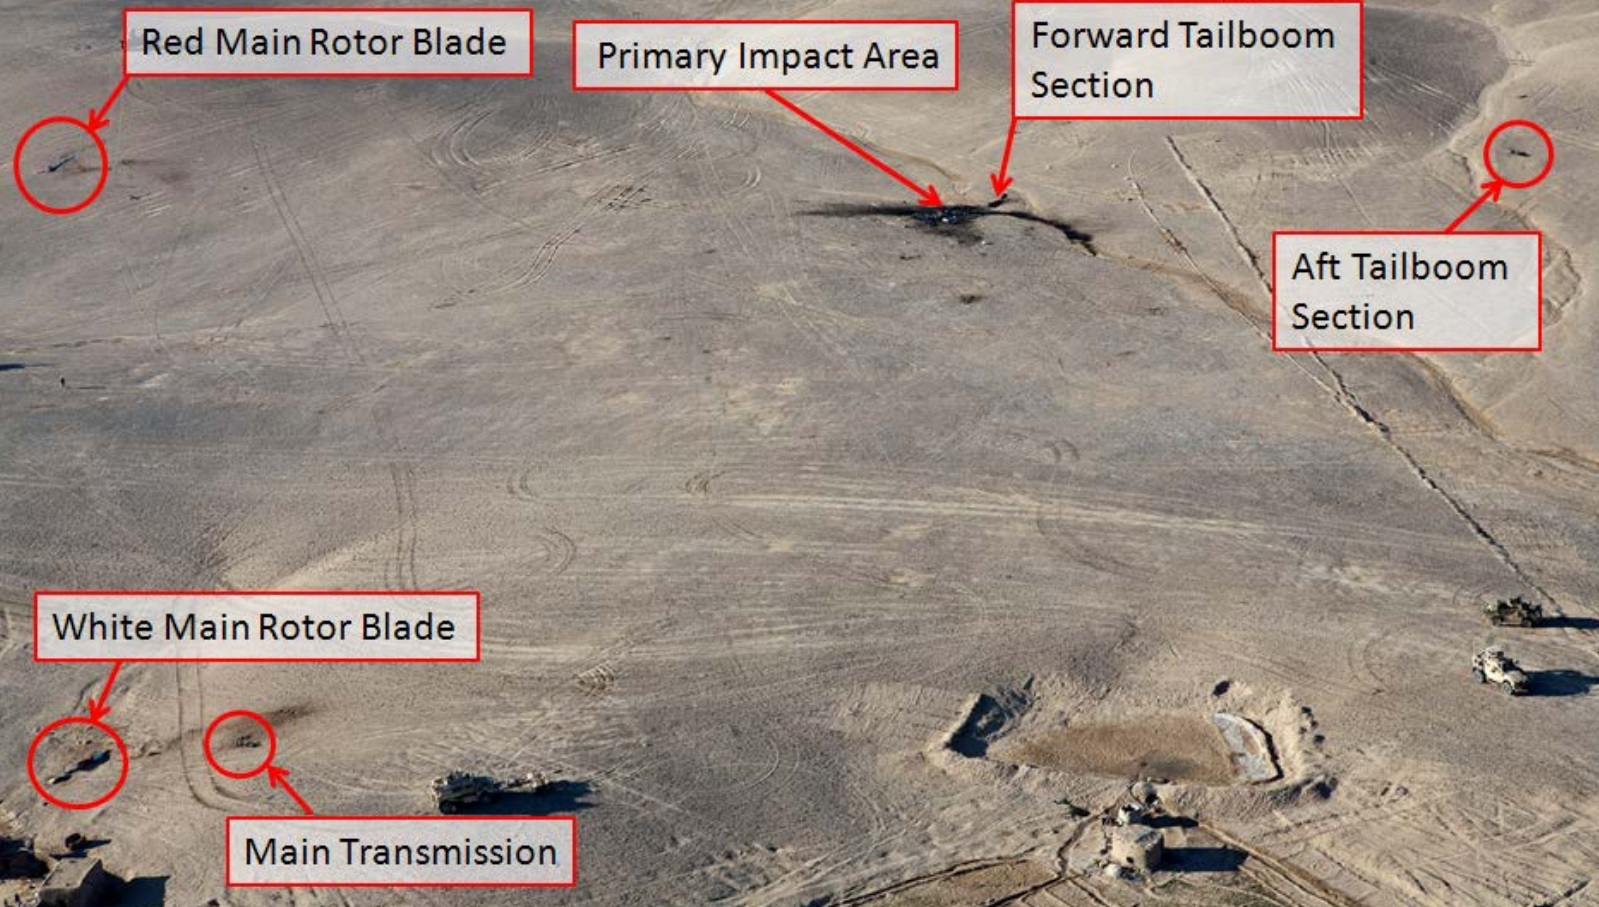 Accident Site of AAR Airlift Bell 214ST B5748M in Helmand (Credit: DOD via NTSB)